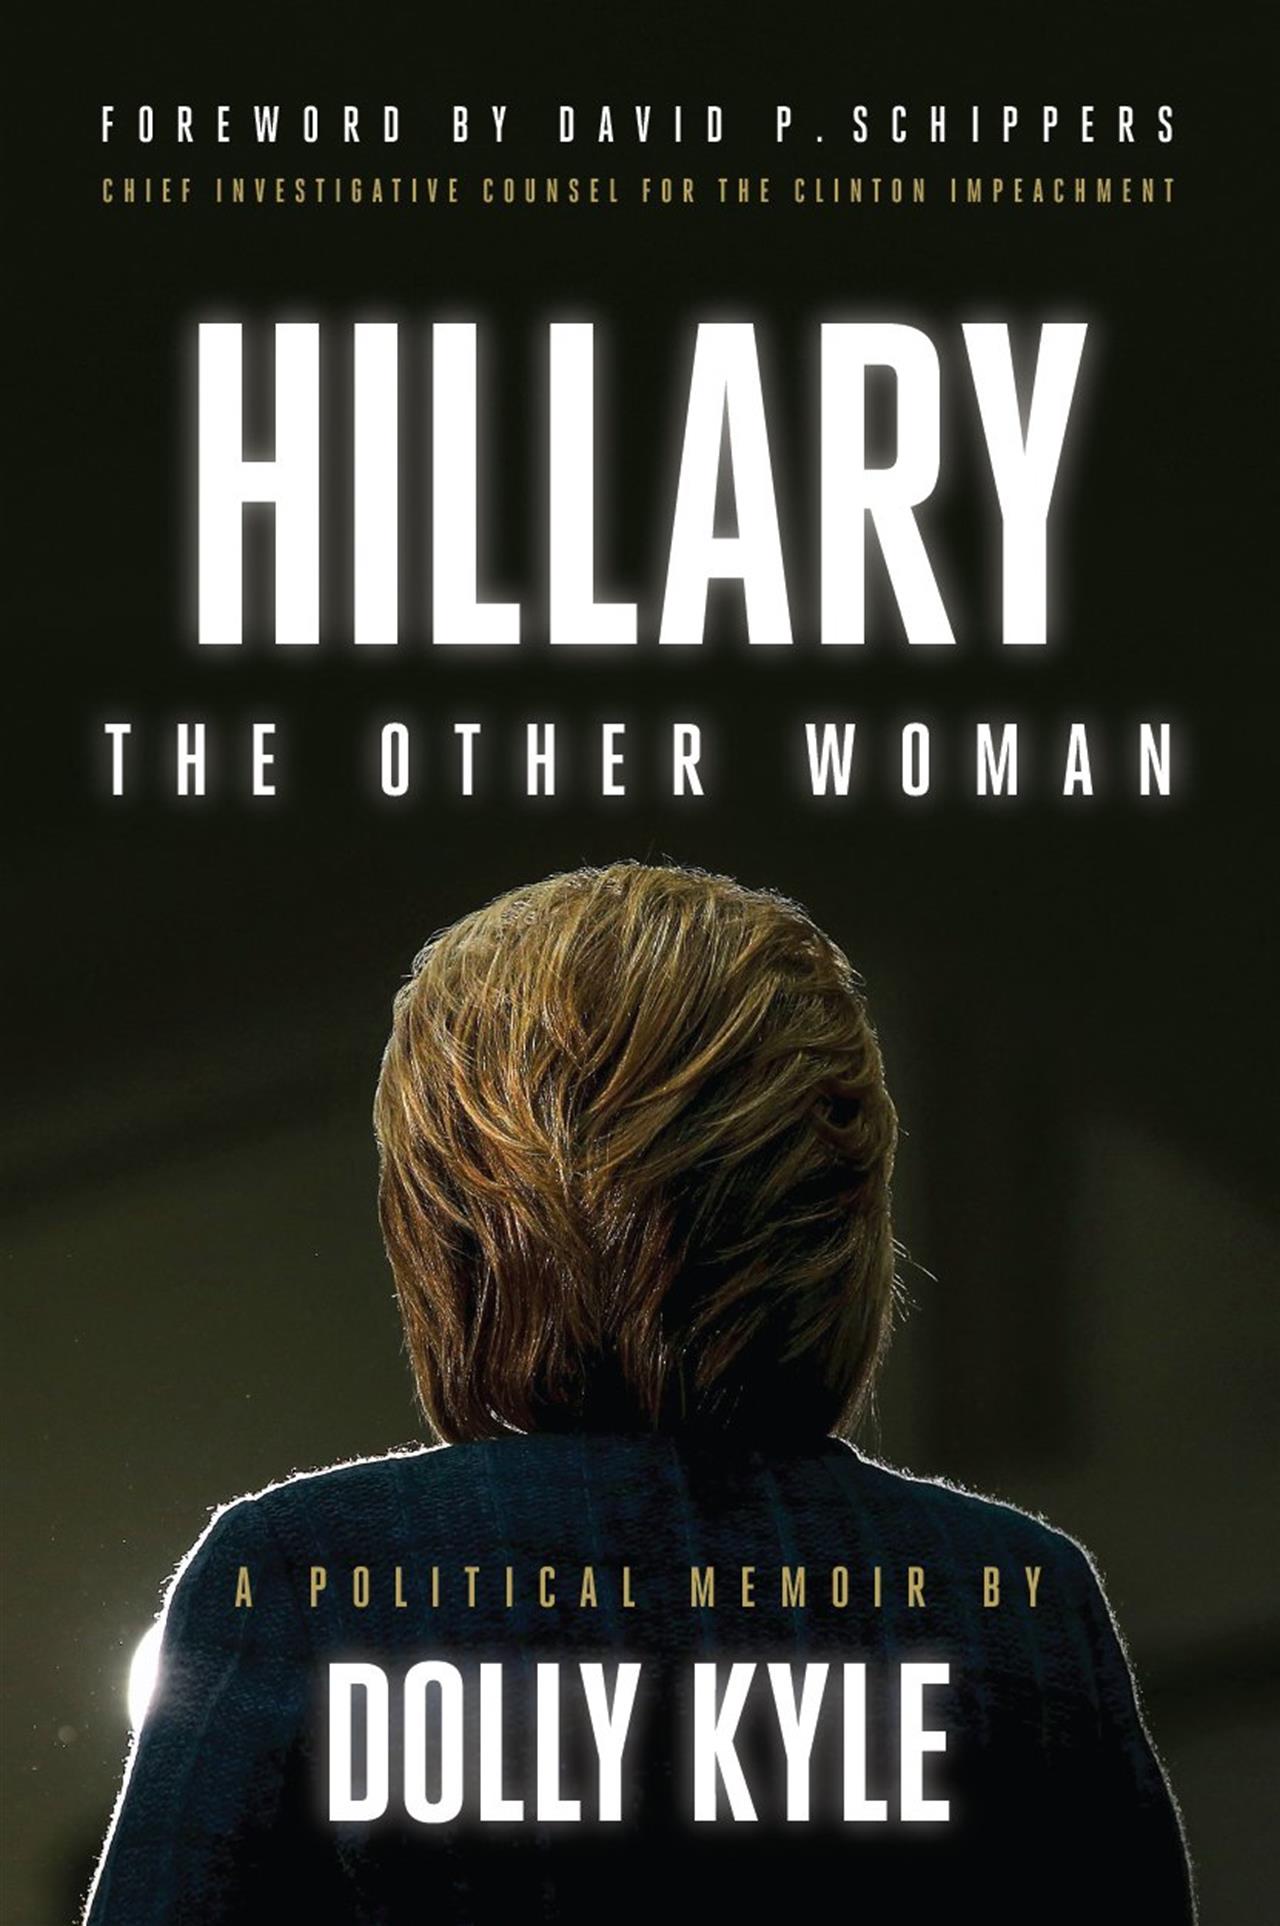 Dolly Kyle – Hillary The Other Woman